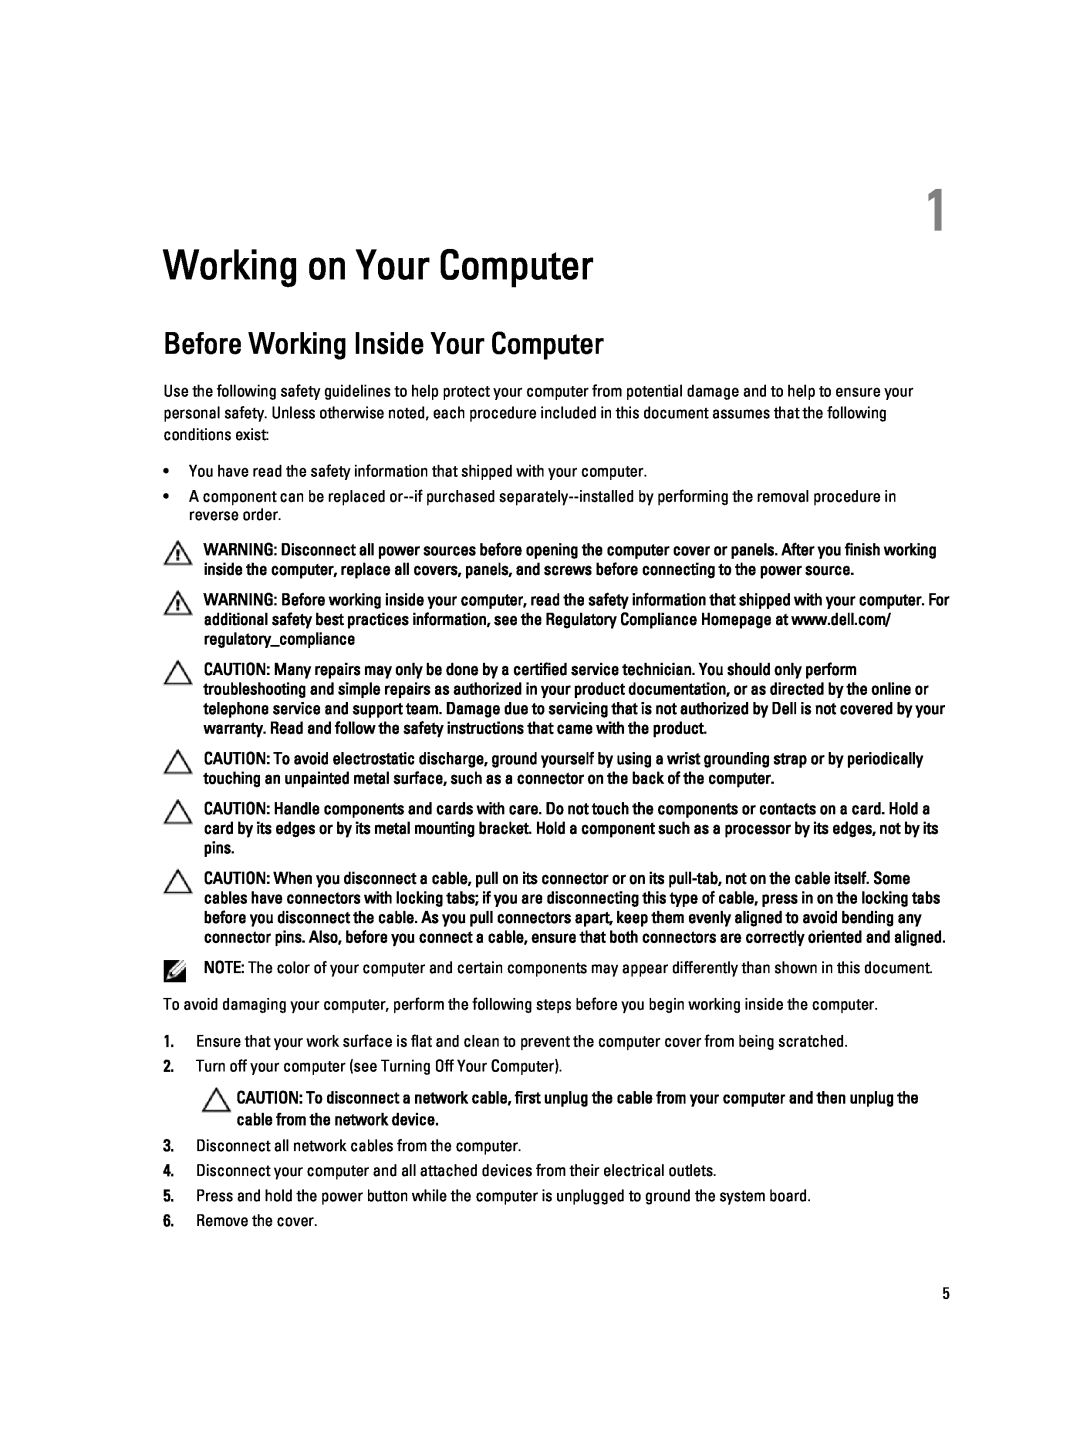 Dell W04C owner manual Working on Your Computer, Before Working Inside Your Computer 